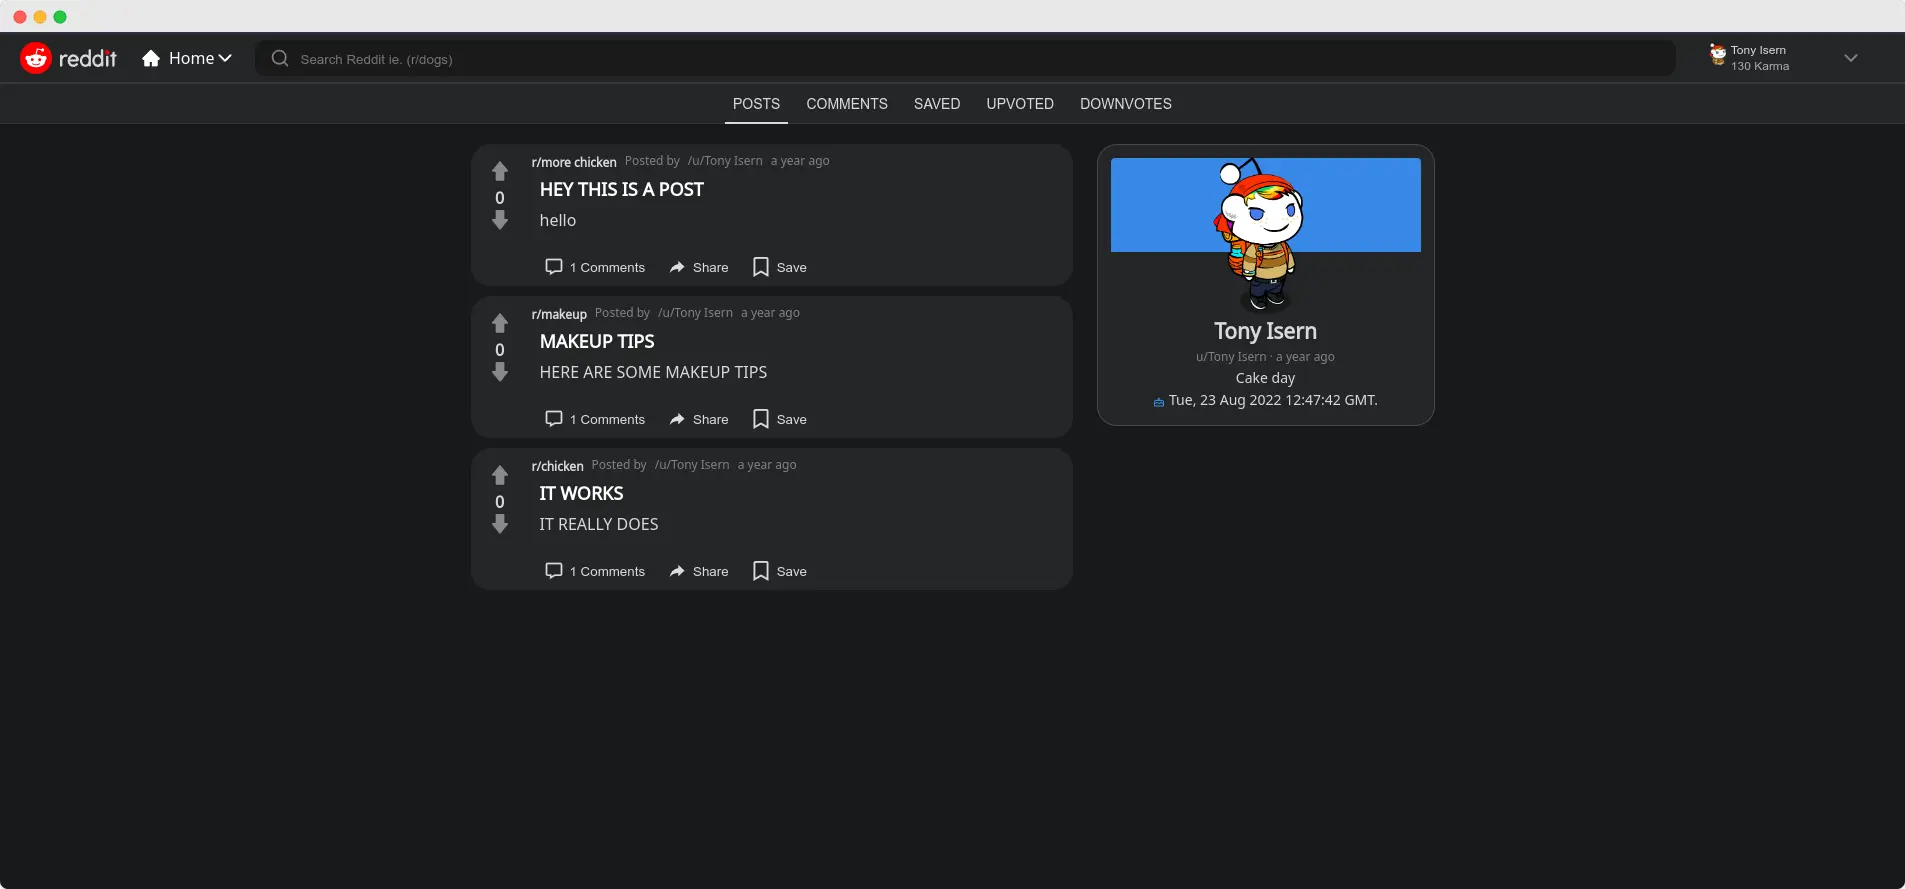 A screenshot of a Reddit profile page. The top bar displays the Reddit logo and search bar. The right side of the page features a profile picture of an animated character with a Santa hat, labeled 'Tony Isern'. Below the profile picture, there is information indicating that the user joined 'a year ago' and their cake day is 'Tue, 23 Aug 2022 12:47:42 GMT'. The left side showcases three Reddit posts made by the user 'Tony Isern' in different subreddits titled 'r/more chicken', 'r/makeup', and 'r/chicken' with respective post titles 'HEY THIS IS A POST', 'MAKEUP TIPS', and 'IT WORKS'